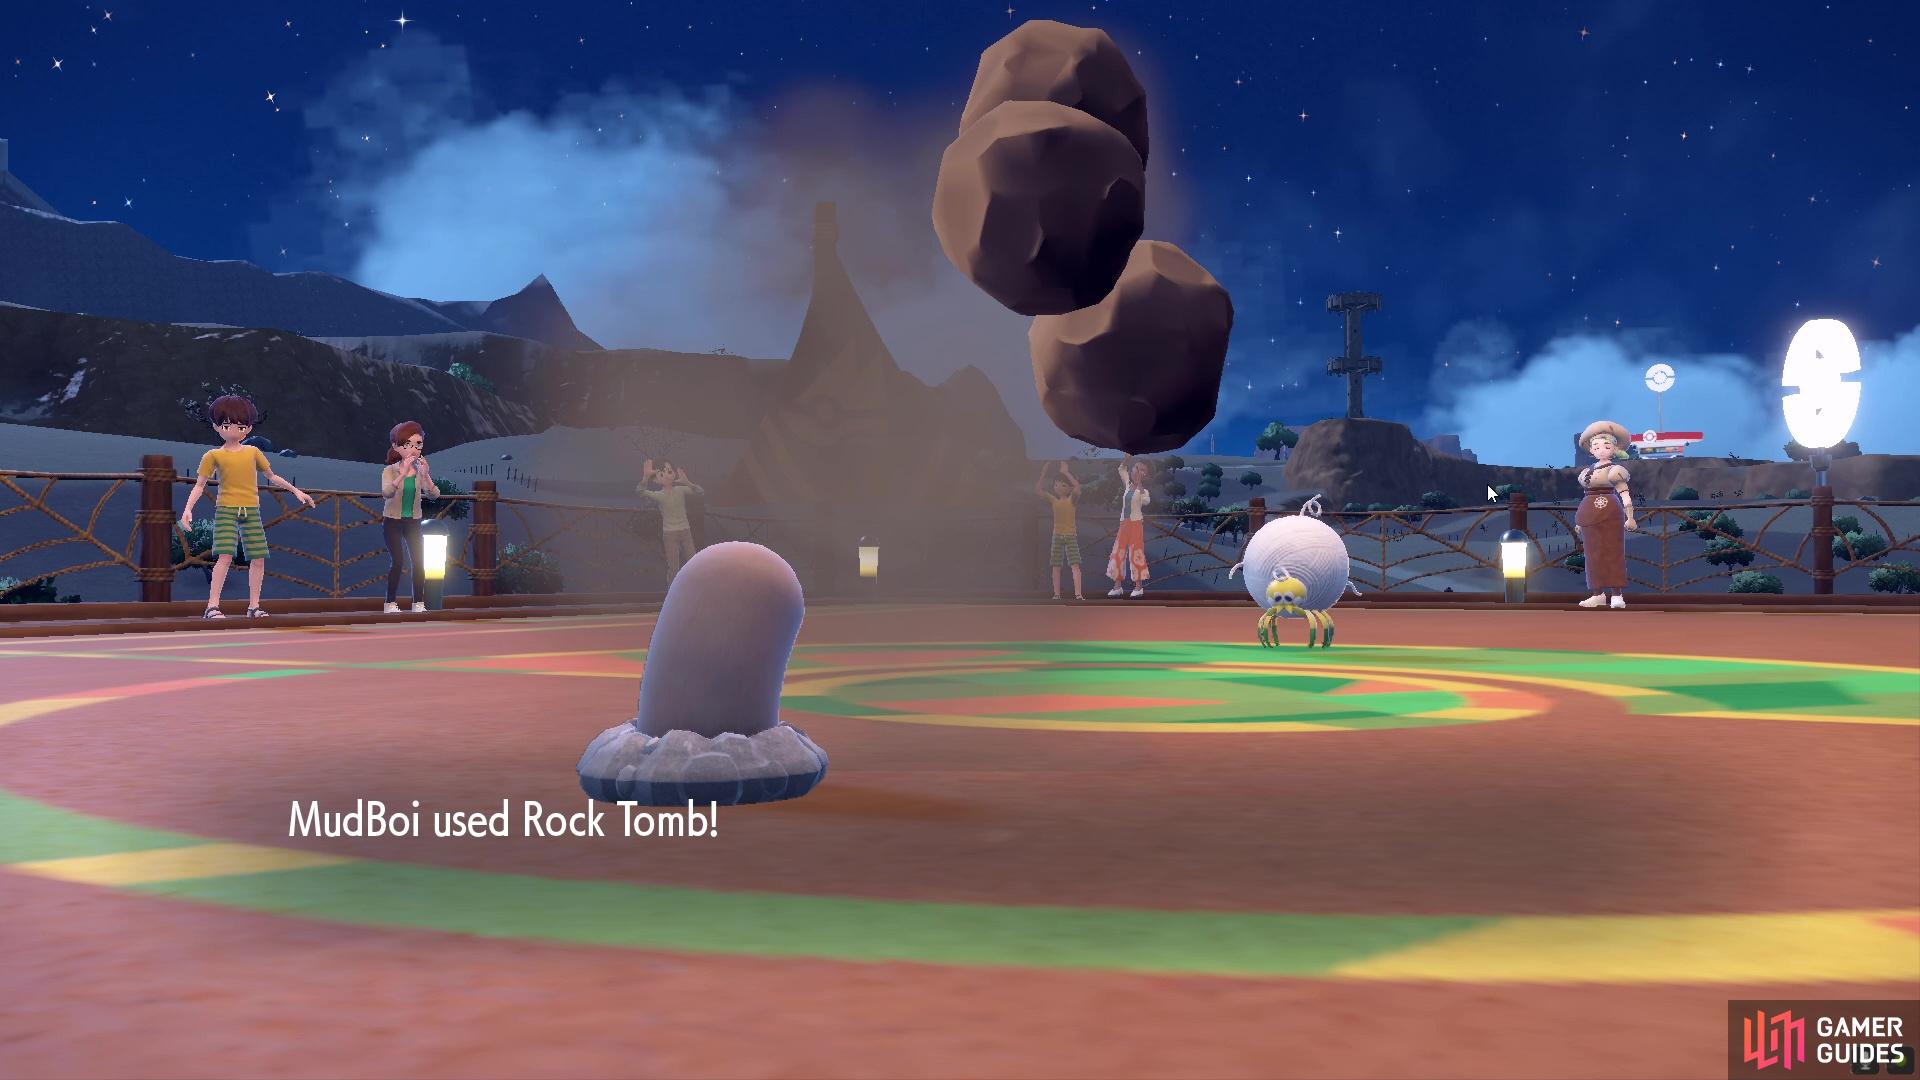 Our Diglett has the move 'Rock Tomb' which is super effective against bug-types.